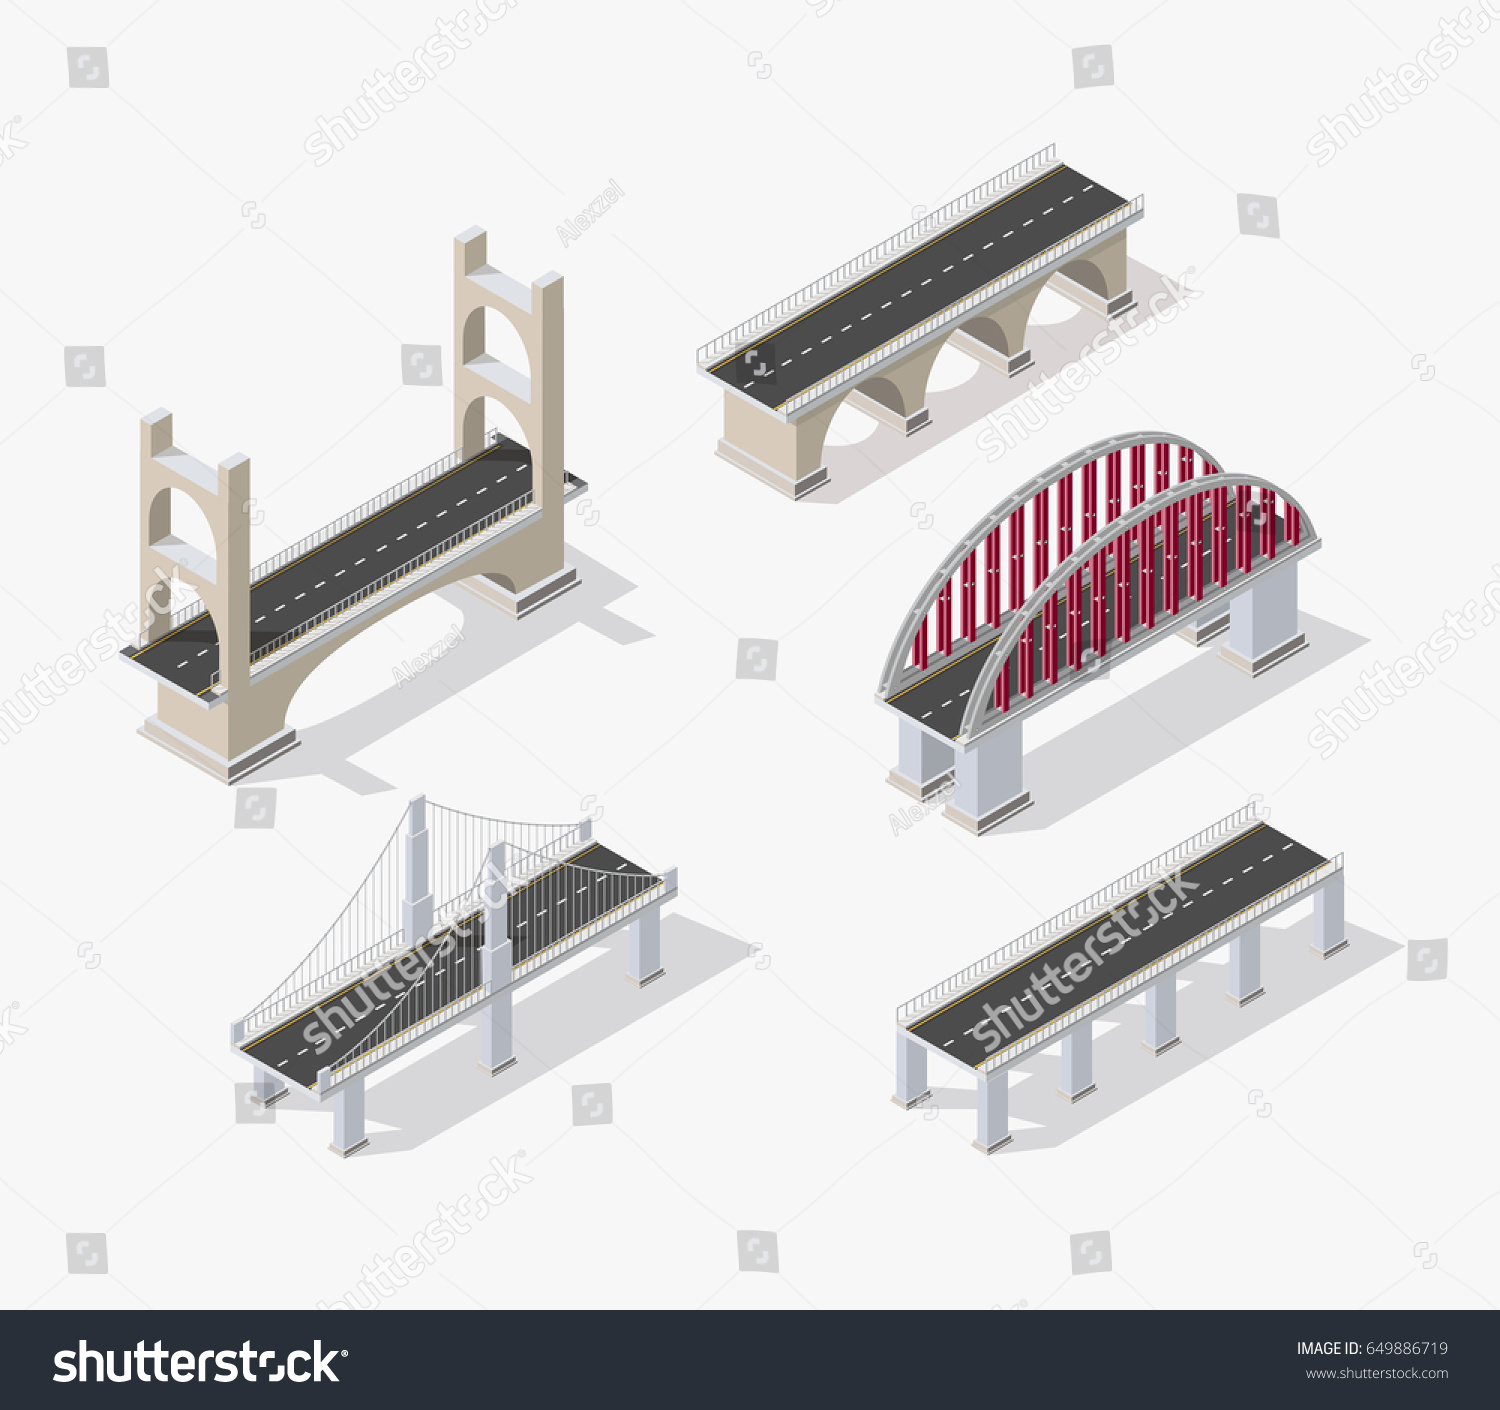 The bridge skyway of urban infrastructure is isometric for games, applications of inspiration and creativity. City transport organization objects in 3D dimensional form #649886719